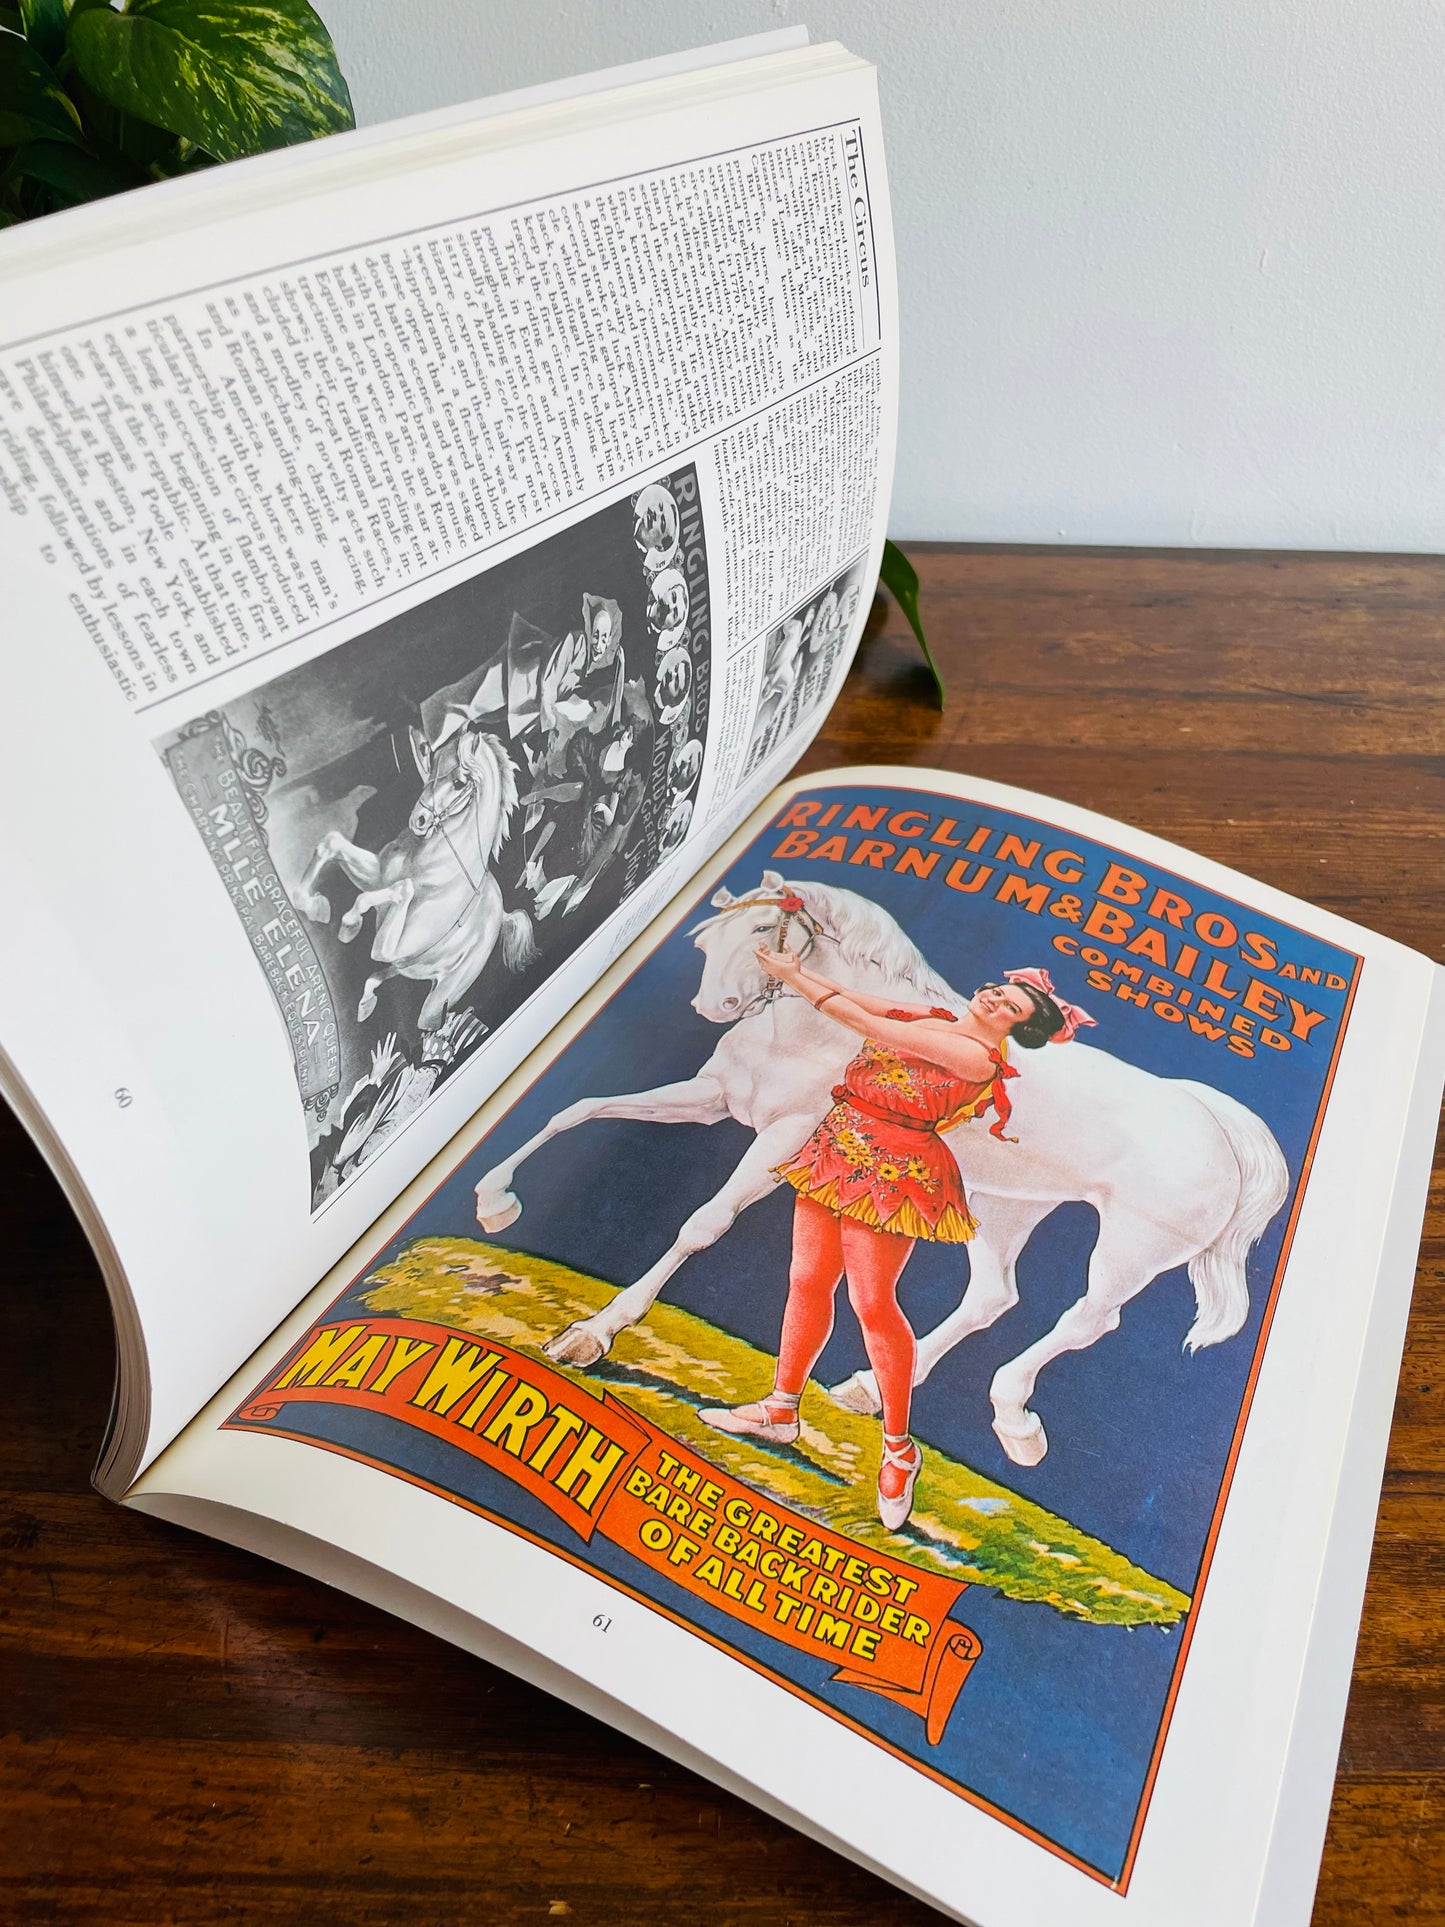 The Illustrated Horse Book by Jean-Claude Suares & Charles Stephen (1979)